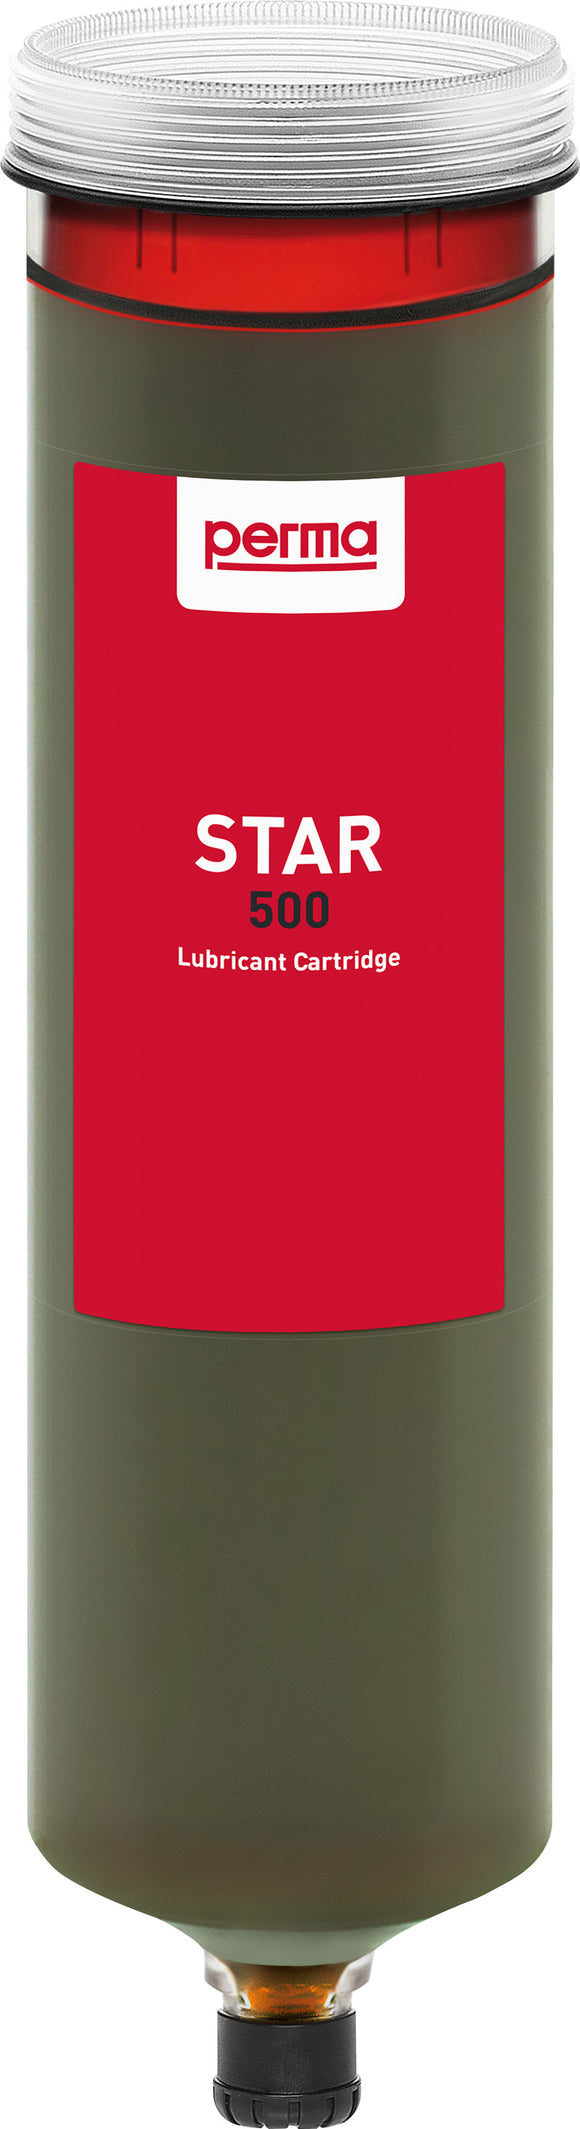 Perma Star LC 500 with Perma High temp. Grease SF03